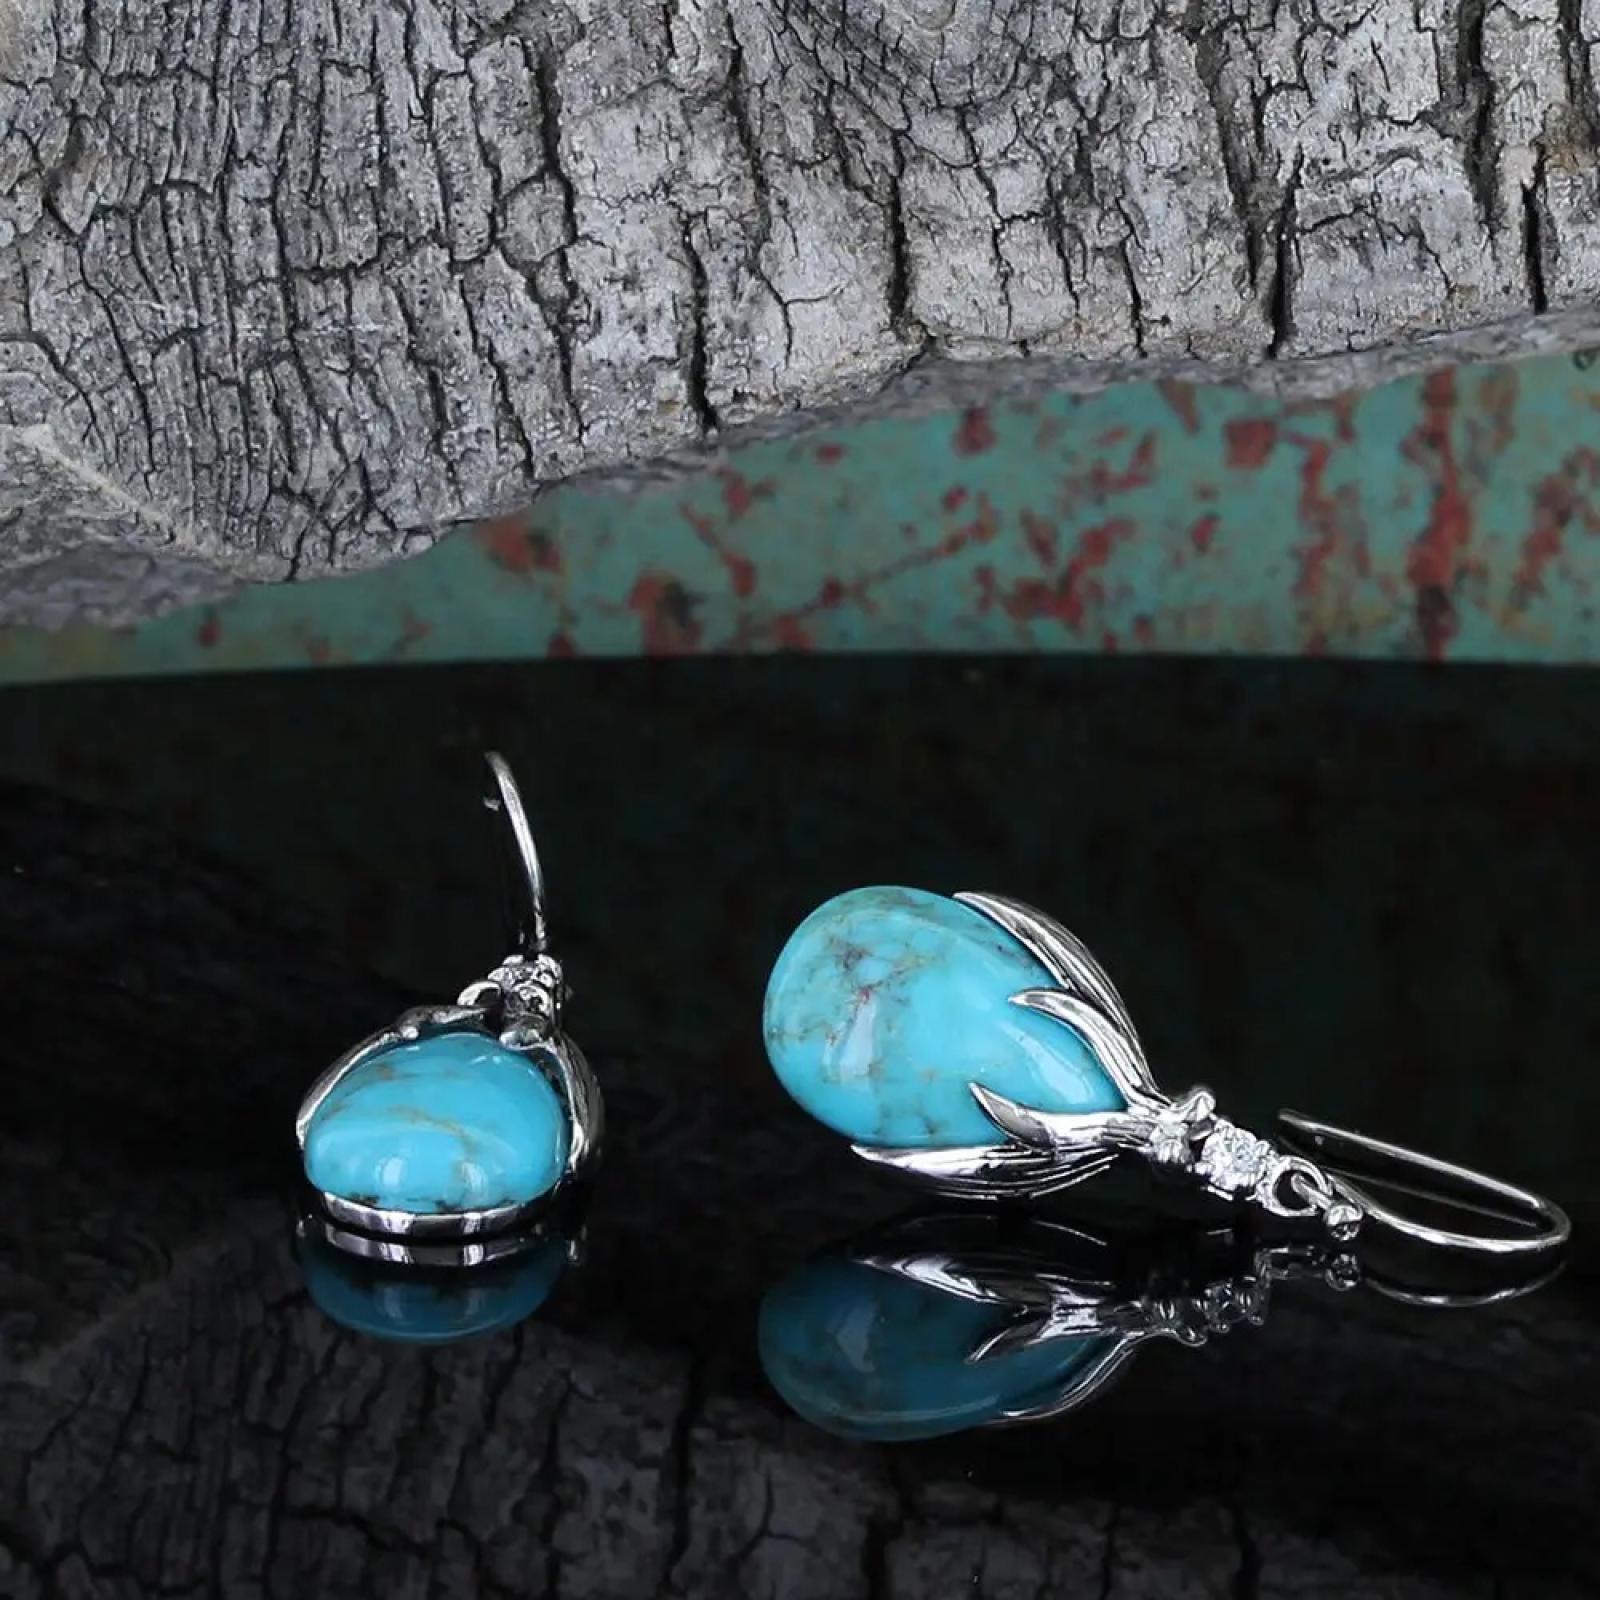 Montana Silversmiths Pursue the Wild Crowns of Glory Turquoise Earrings